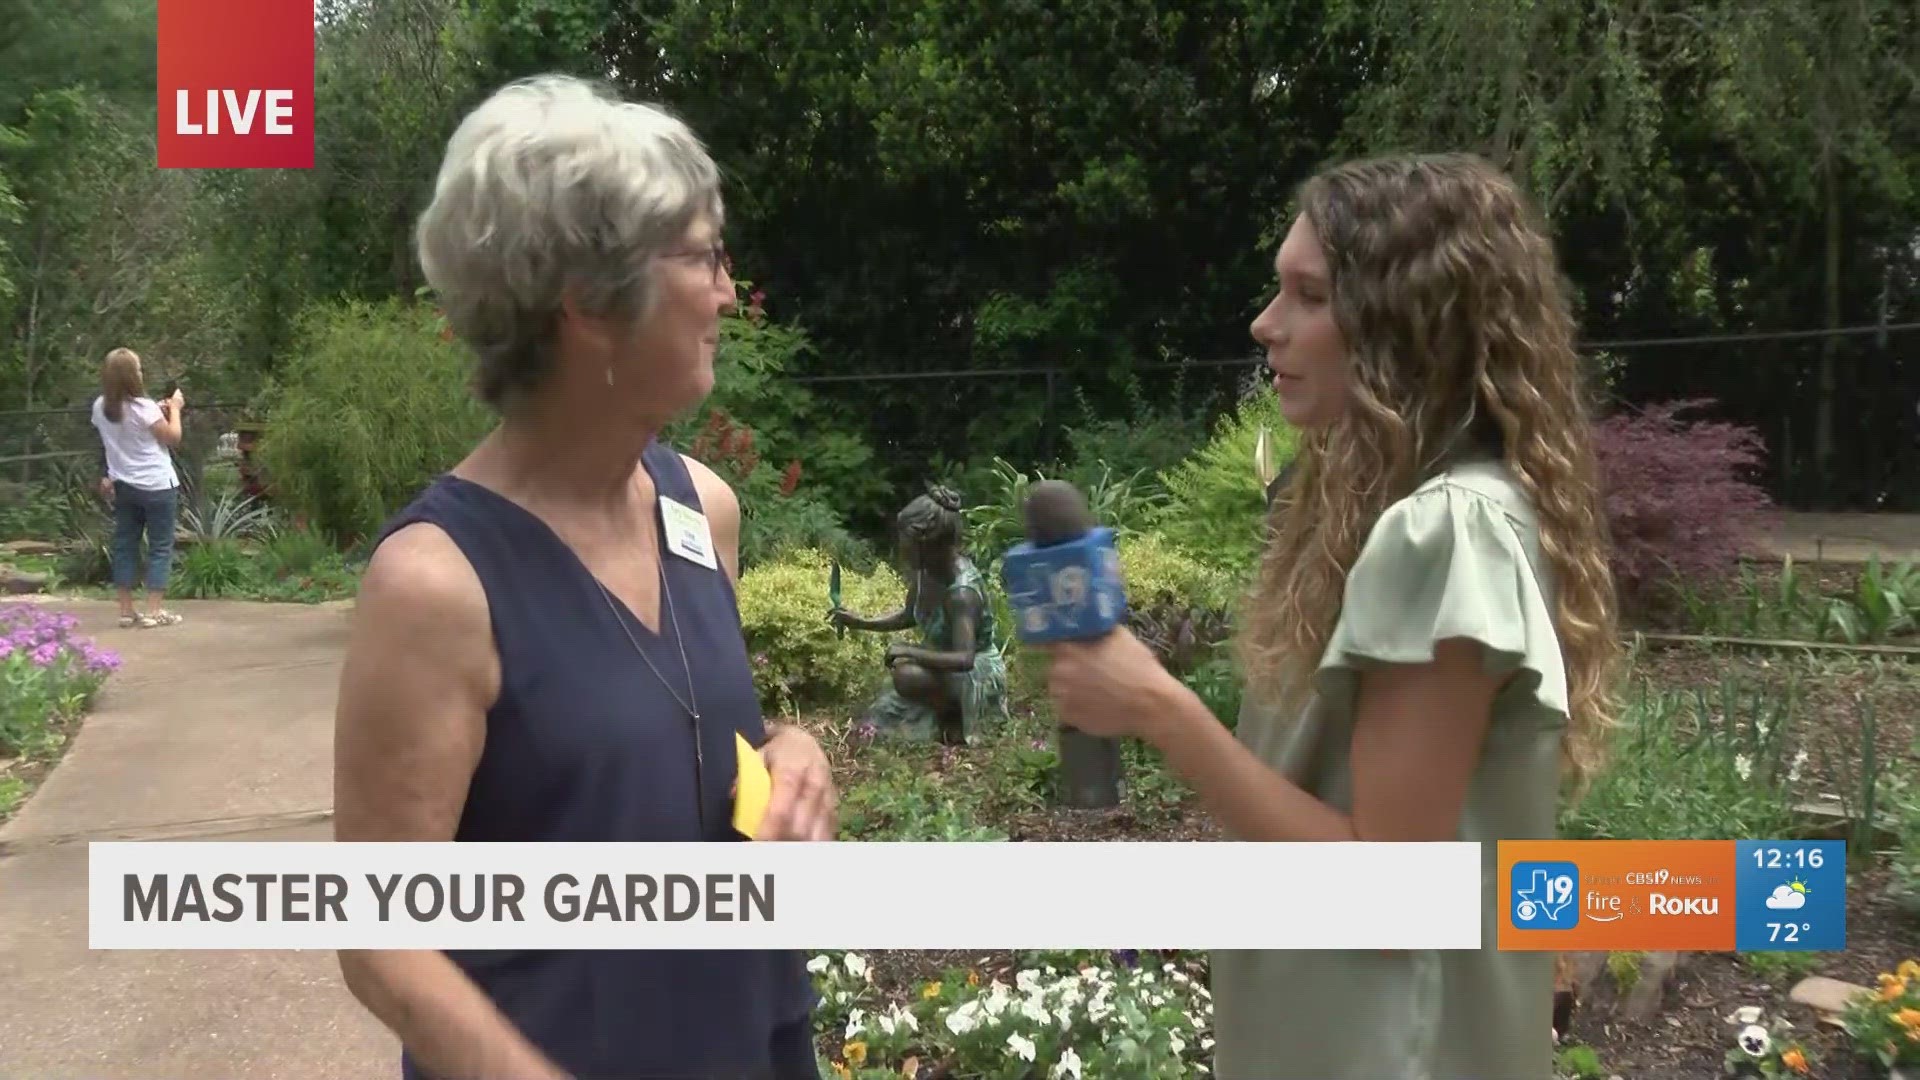 Well, the Smith County Master Gardeners join CBS19 to tell us how to create a no-till garden!